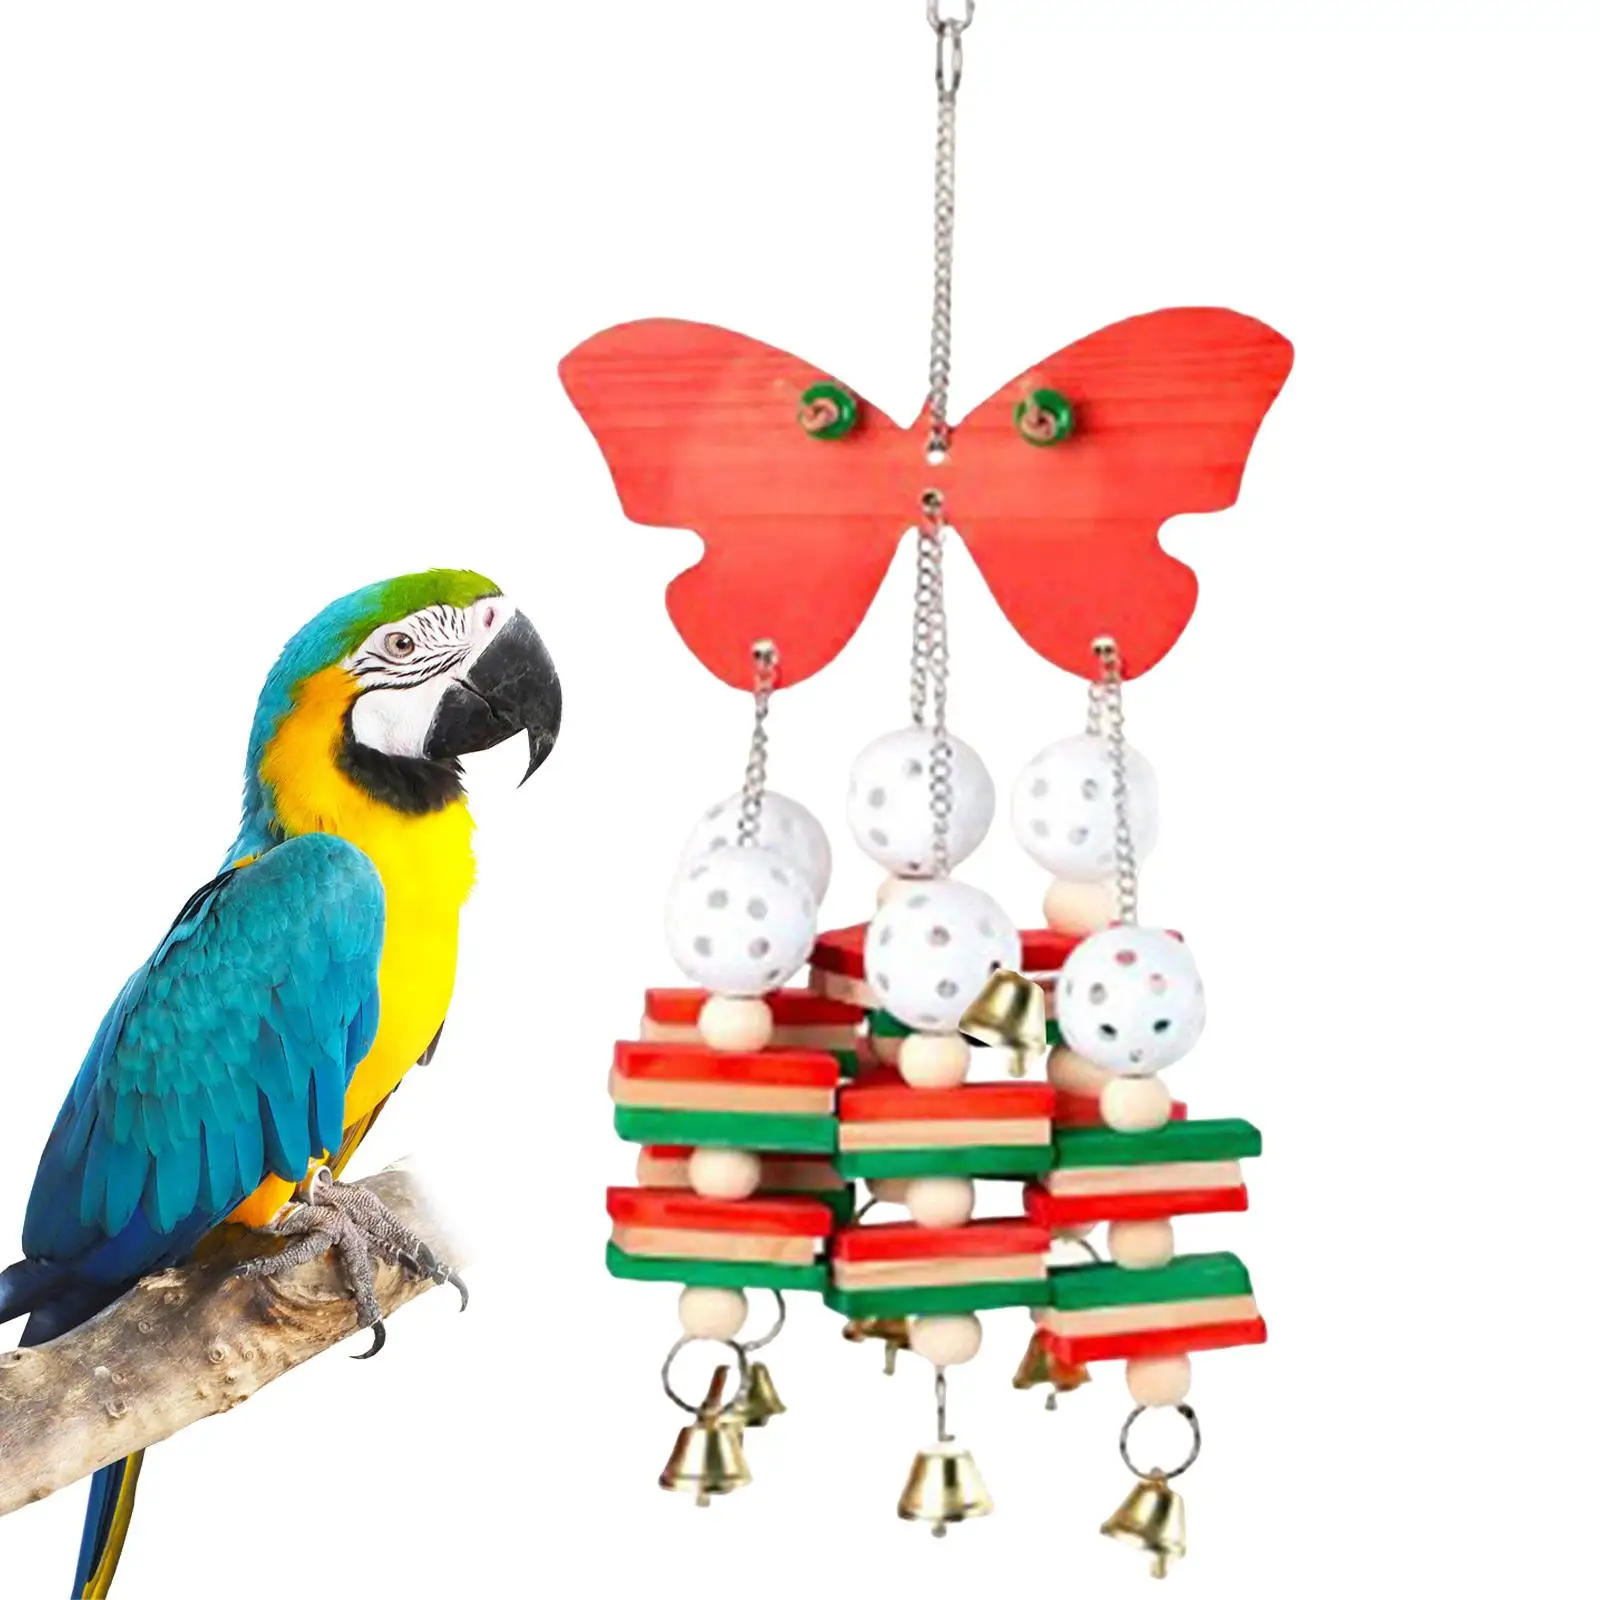 Bird Toy Colorful Decorative Hanging Durable Parrot Chewing Toys for Training Birdcages Decoration Macaws Parakeets Play